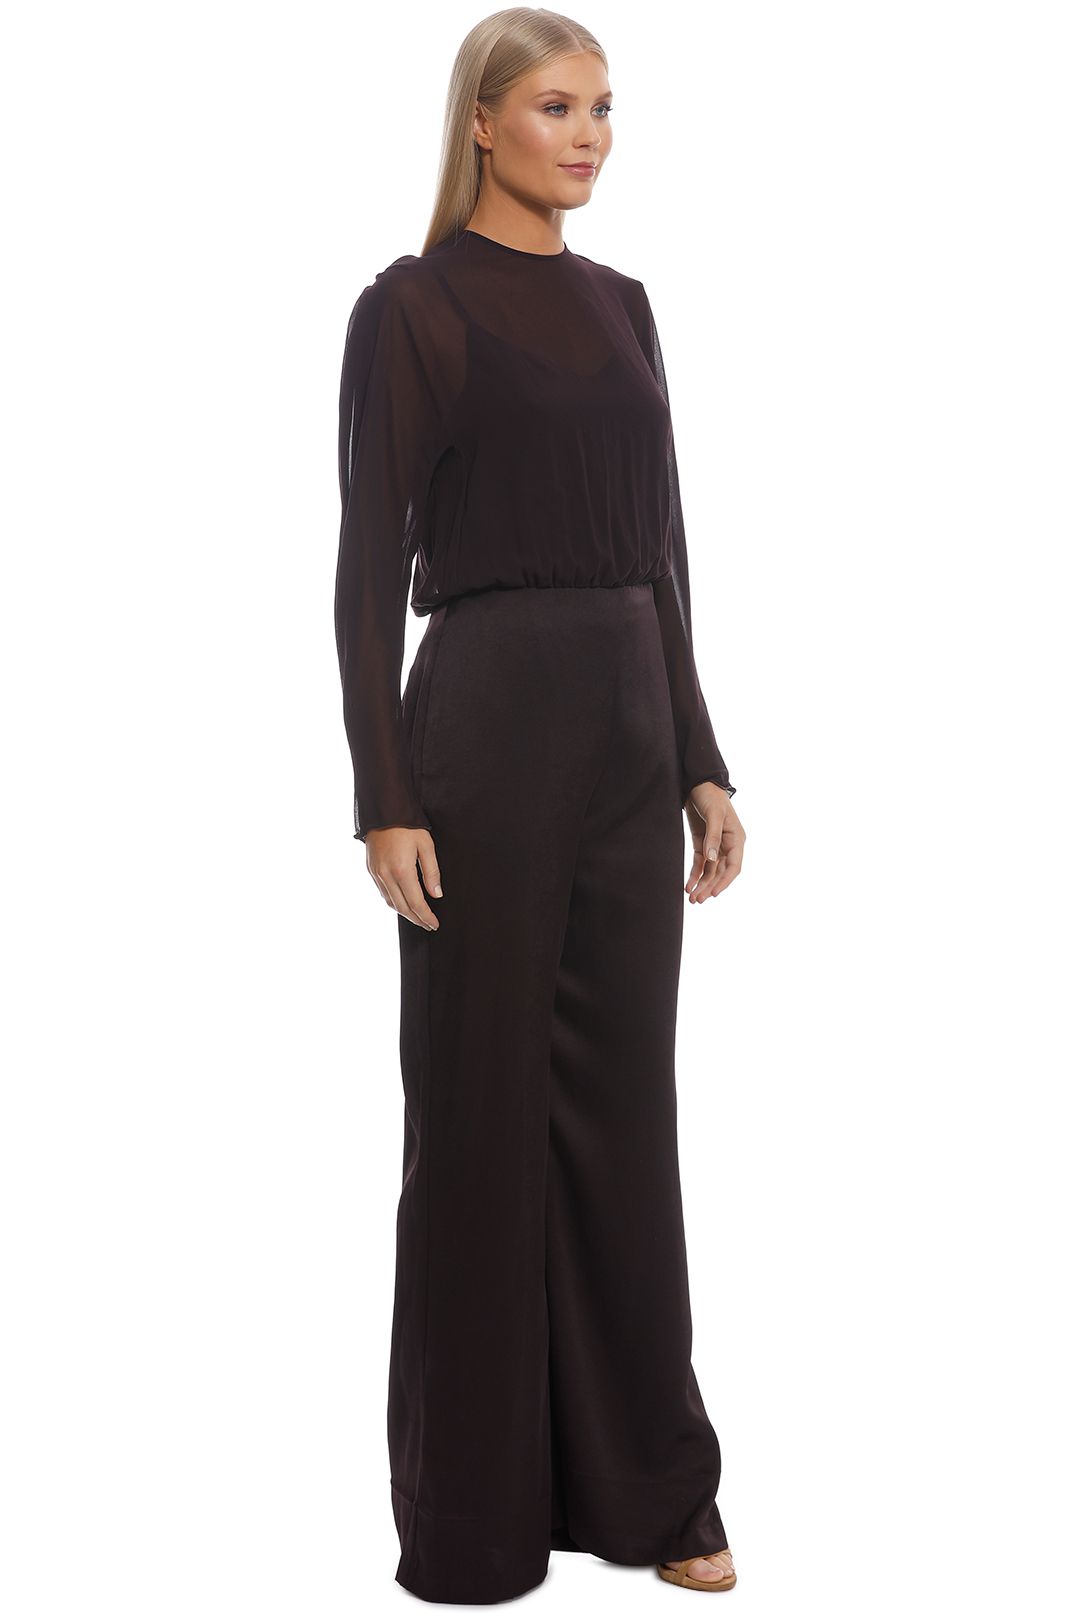 Camilla and Marc - Henderson Jumpsuit - Black - Side